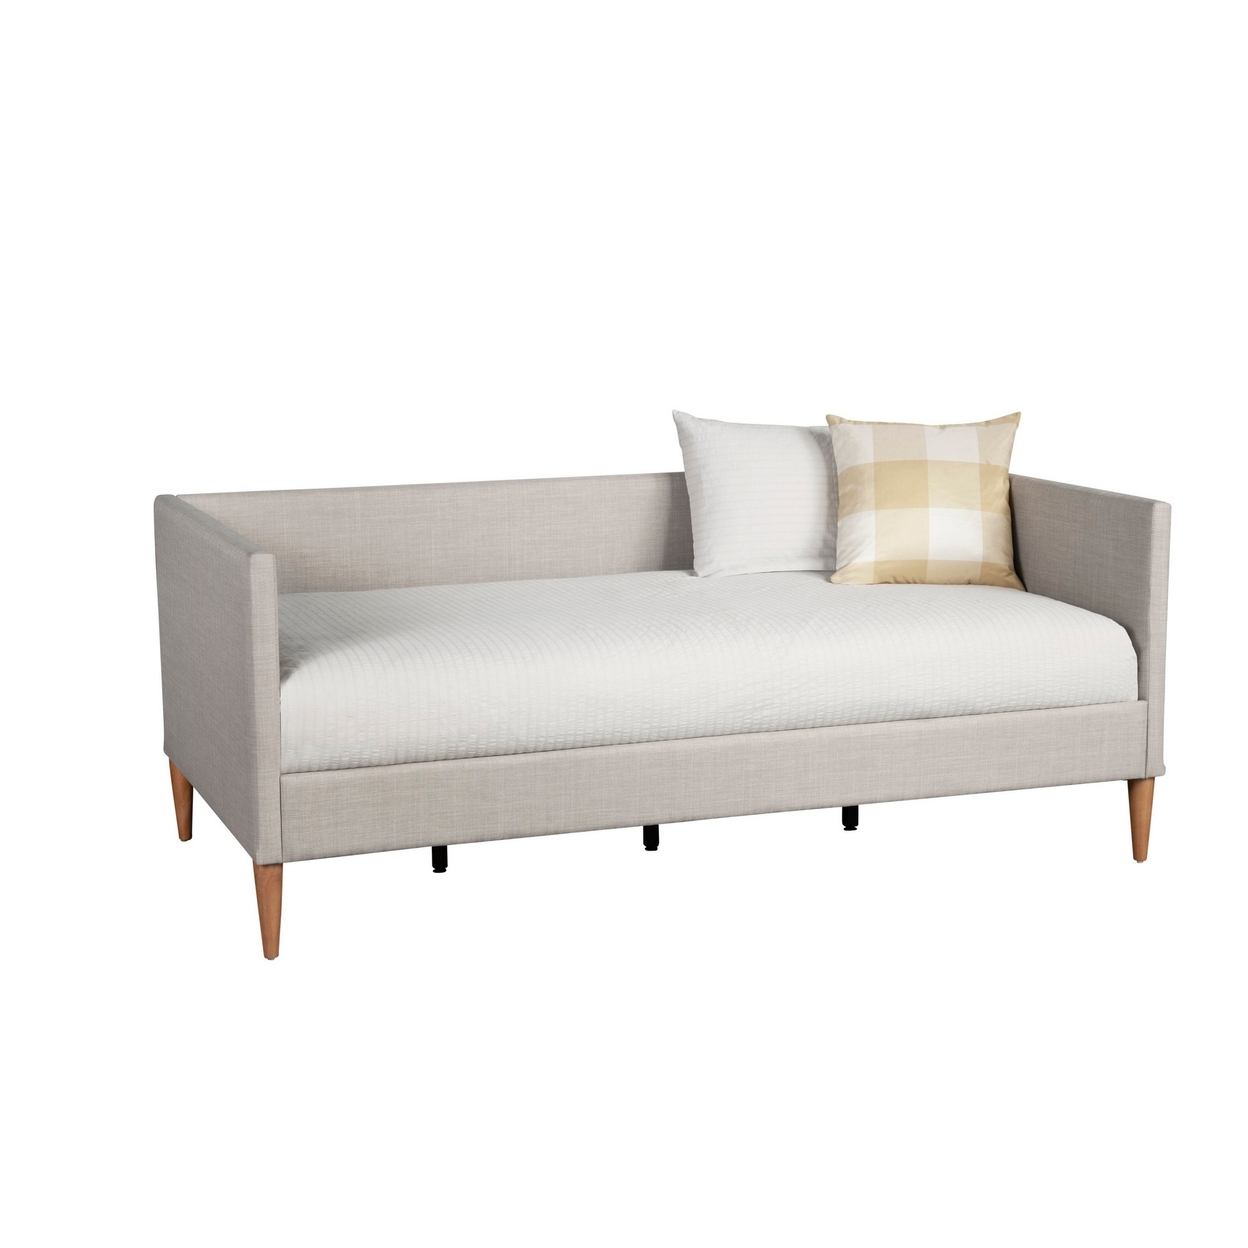 Twin Daybed With Wooden Frame And Fabric Upholstery, Gray- Saltoro Sherpi